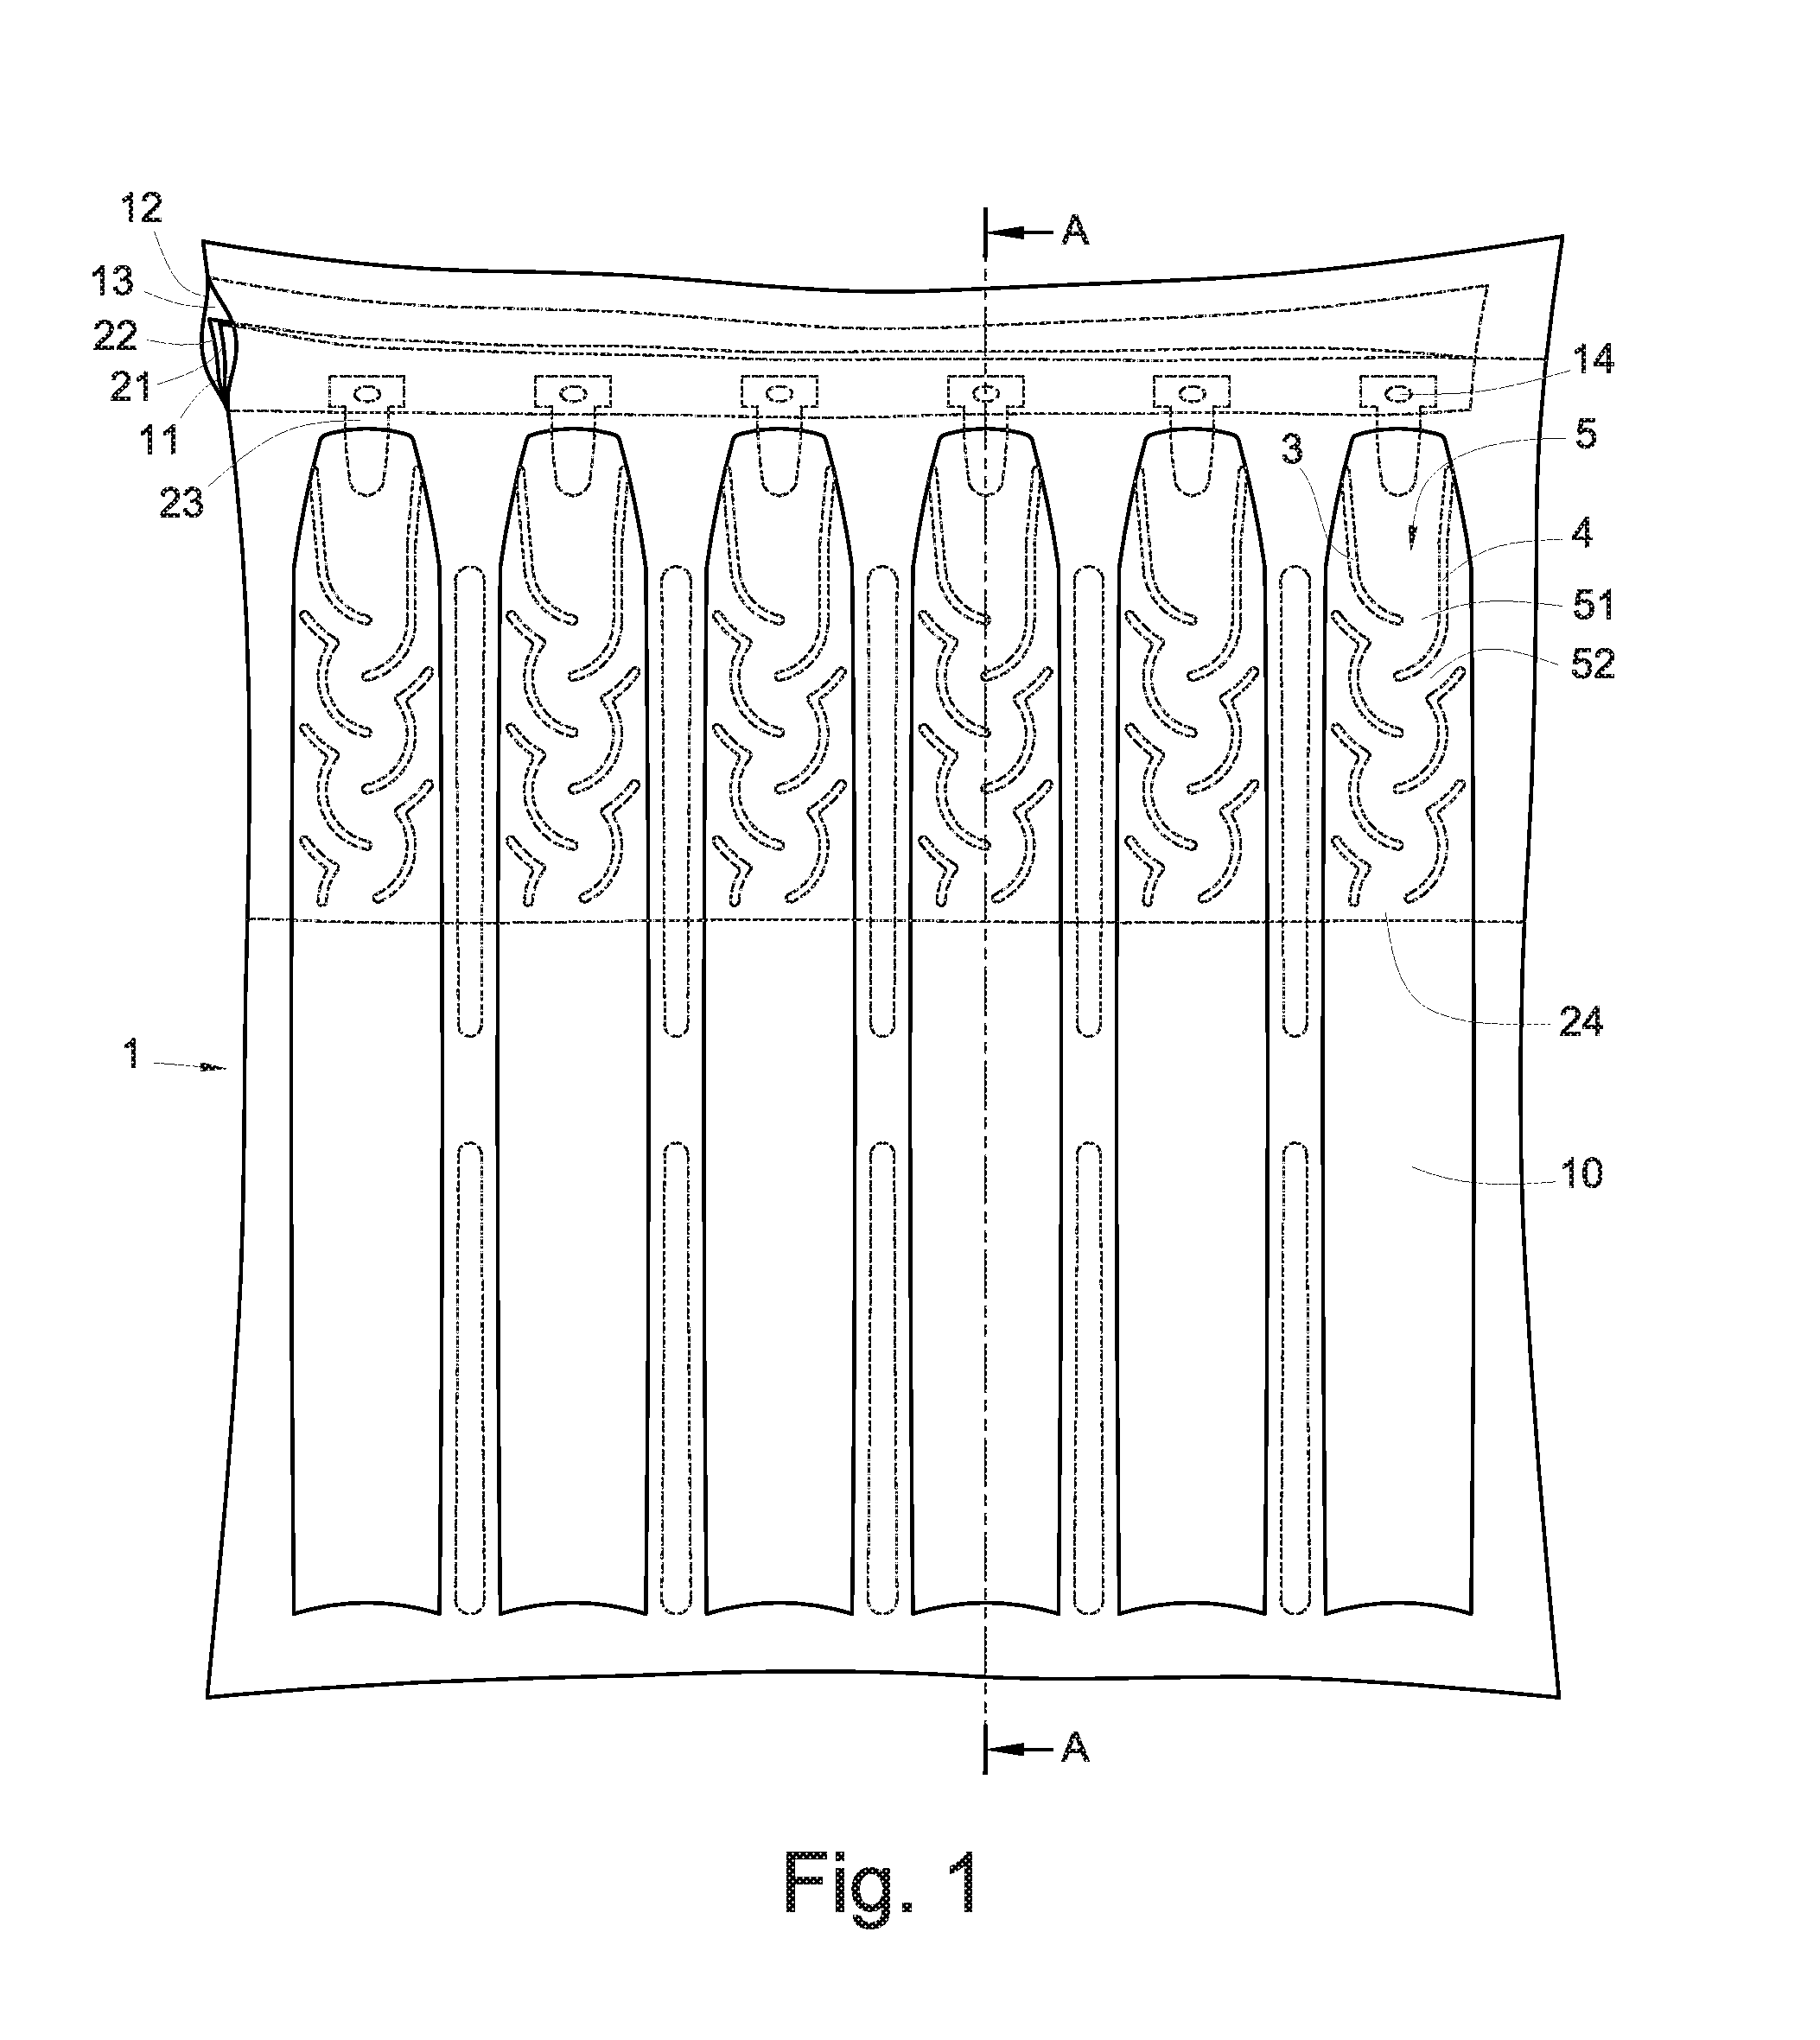 Nonlinear air stop valve structure